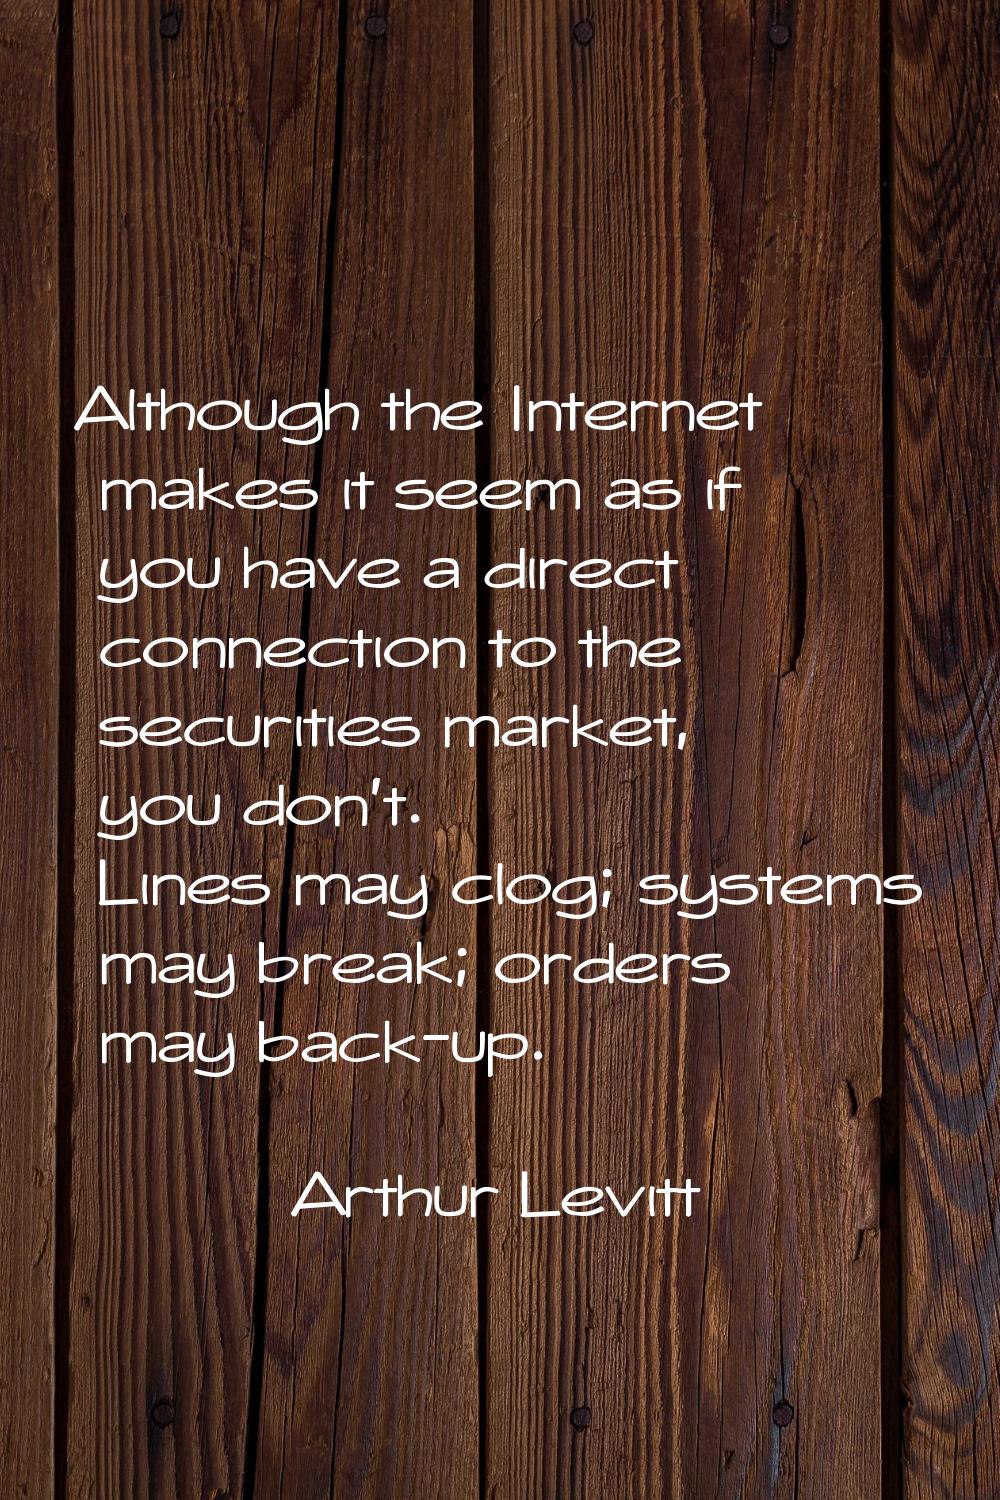 Although the Internet makes it seem as if you have a direct connection to the securities market, yo